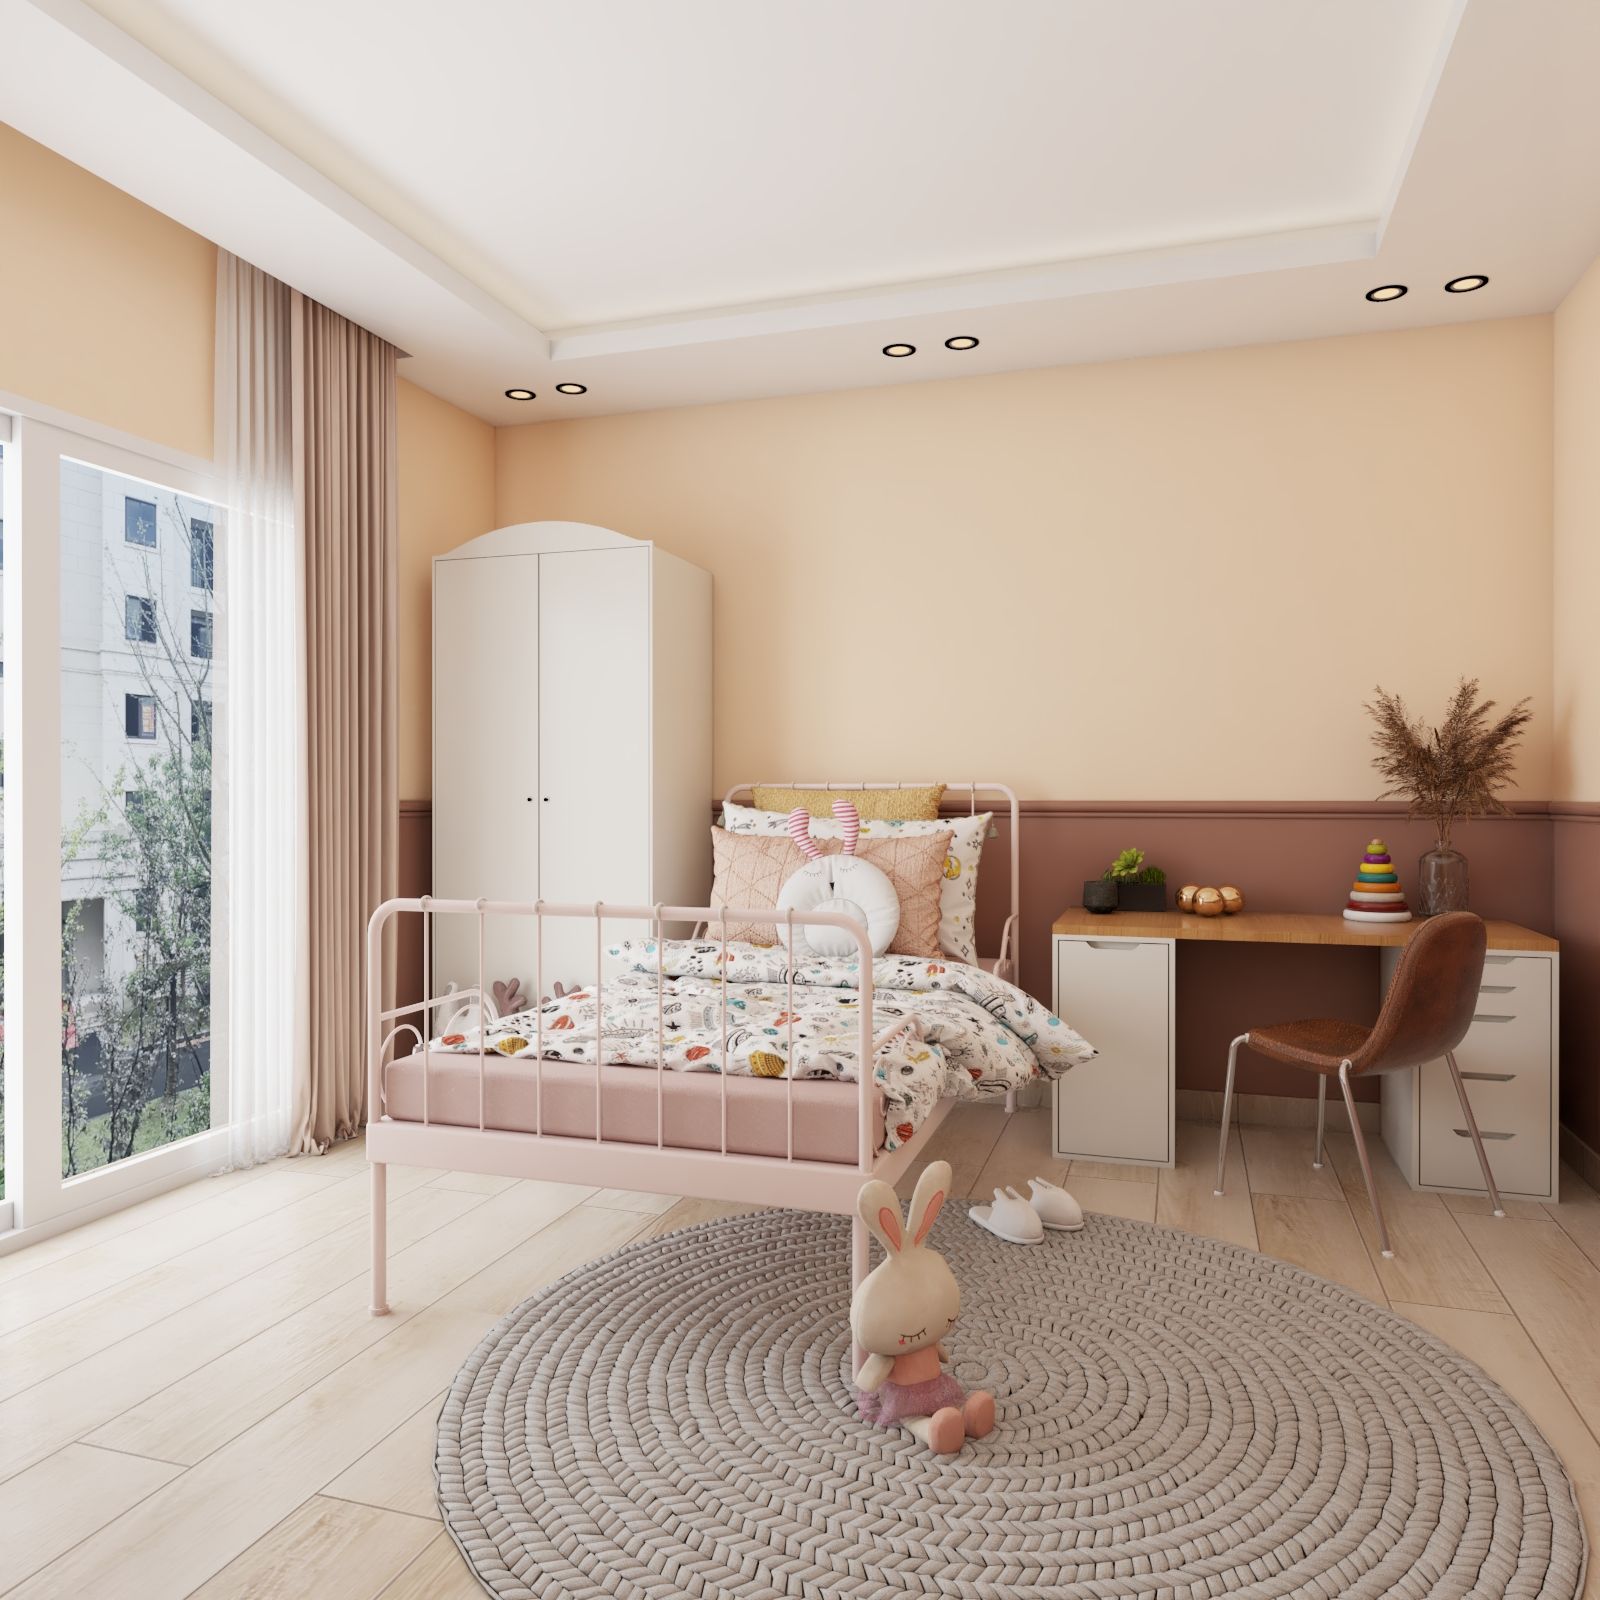 Contemporary Kids Room Design With Dual-Toned Beige And Brown Accent Walls